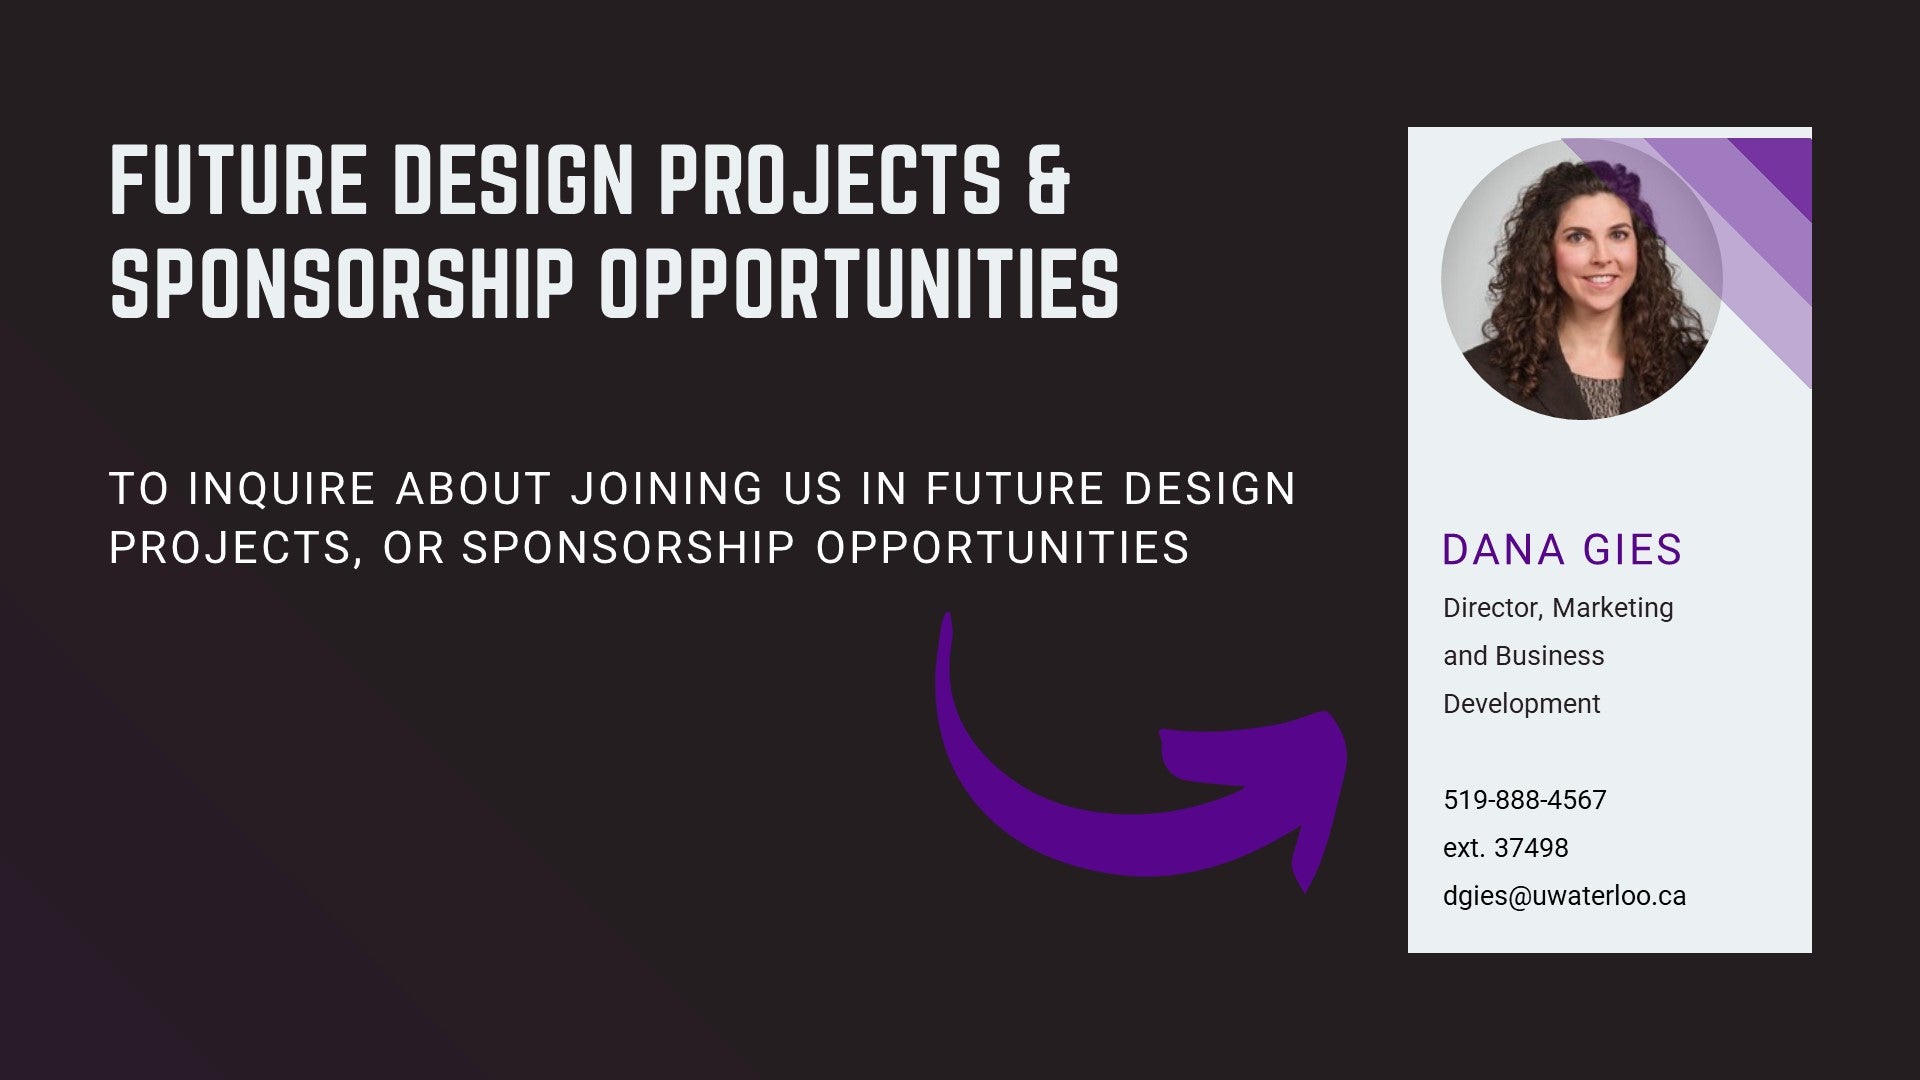 FUTURE DESIGN PROJECTS & SPONSORSHIP OPPORTUNITIES